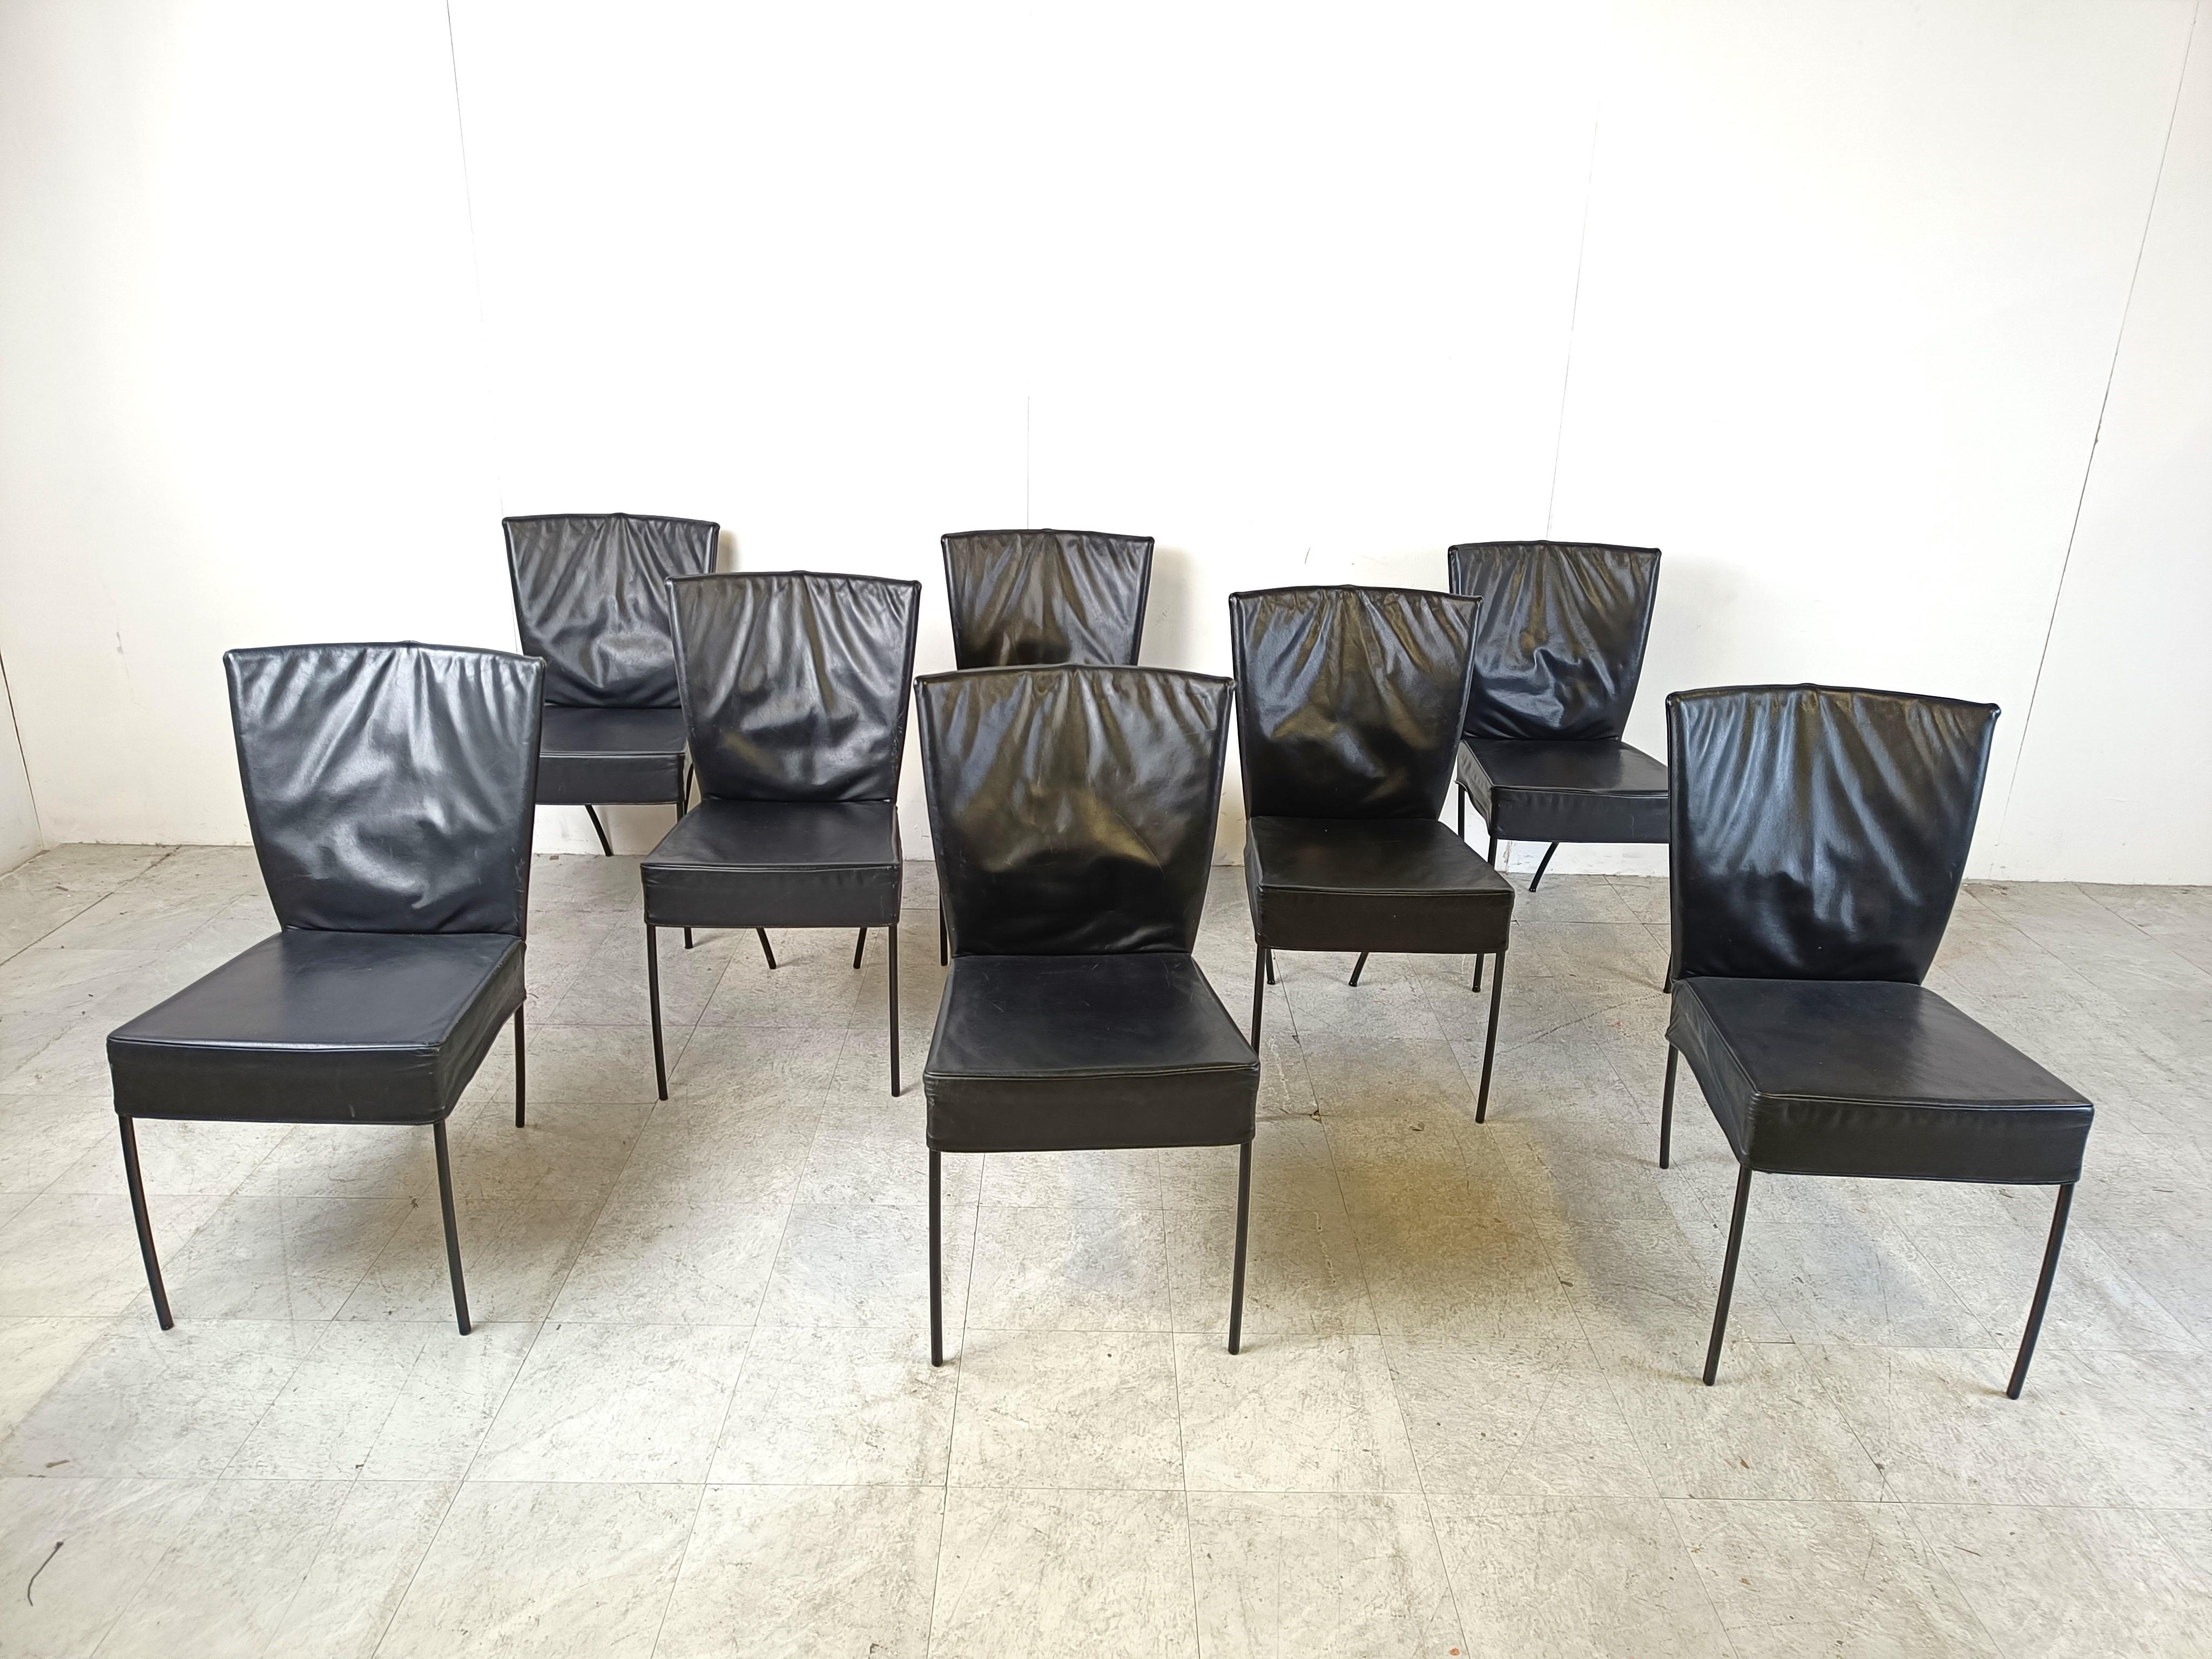 Set of 8 exquisite leather curved dining chairs in the manner of Gerard Van Den berg for Montis.

Beautiful curvy design consisting of thick leather upholstery and black metal frames.

Timeless design

1980s - Netherlands

Measurements
Width: